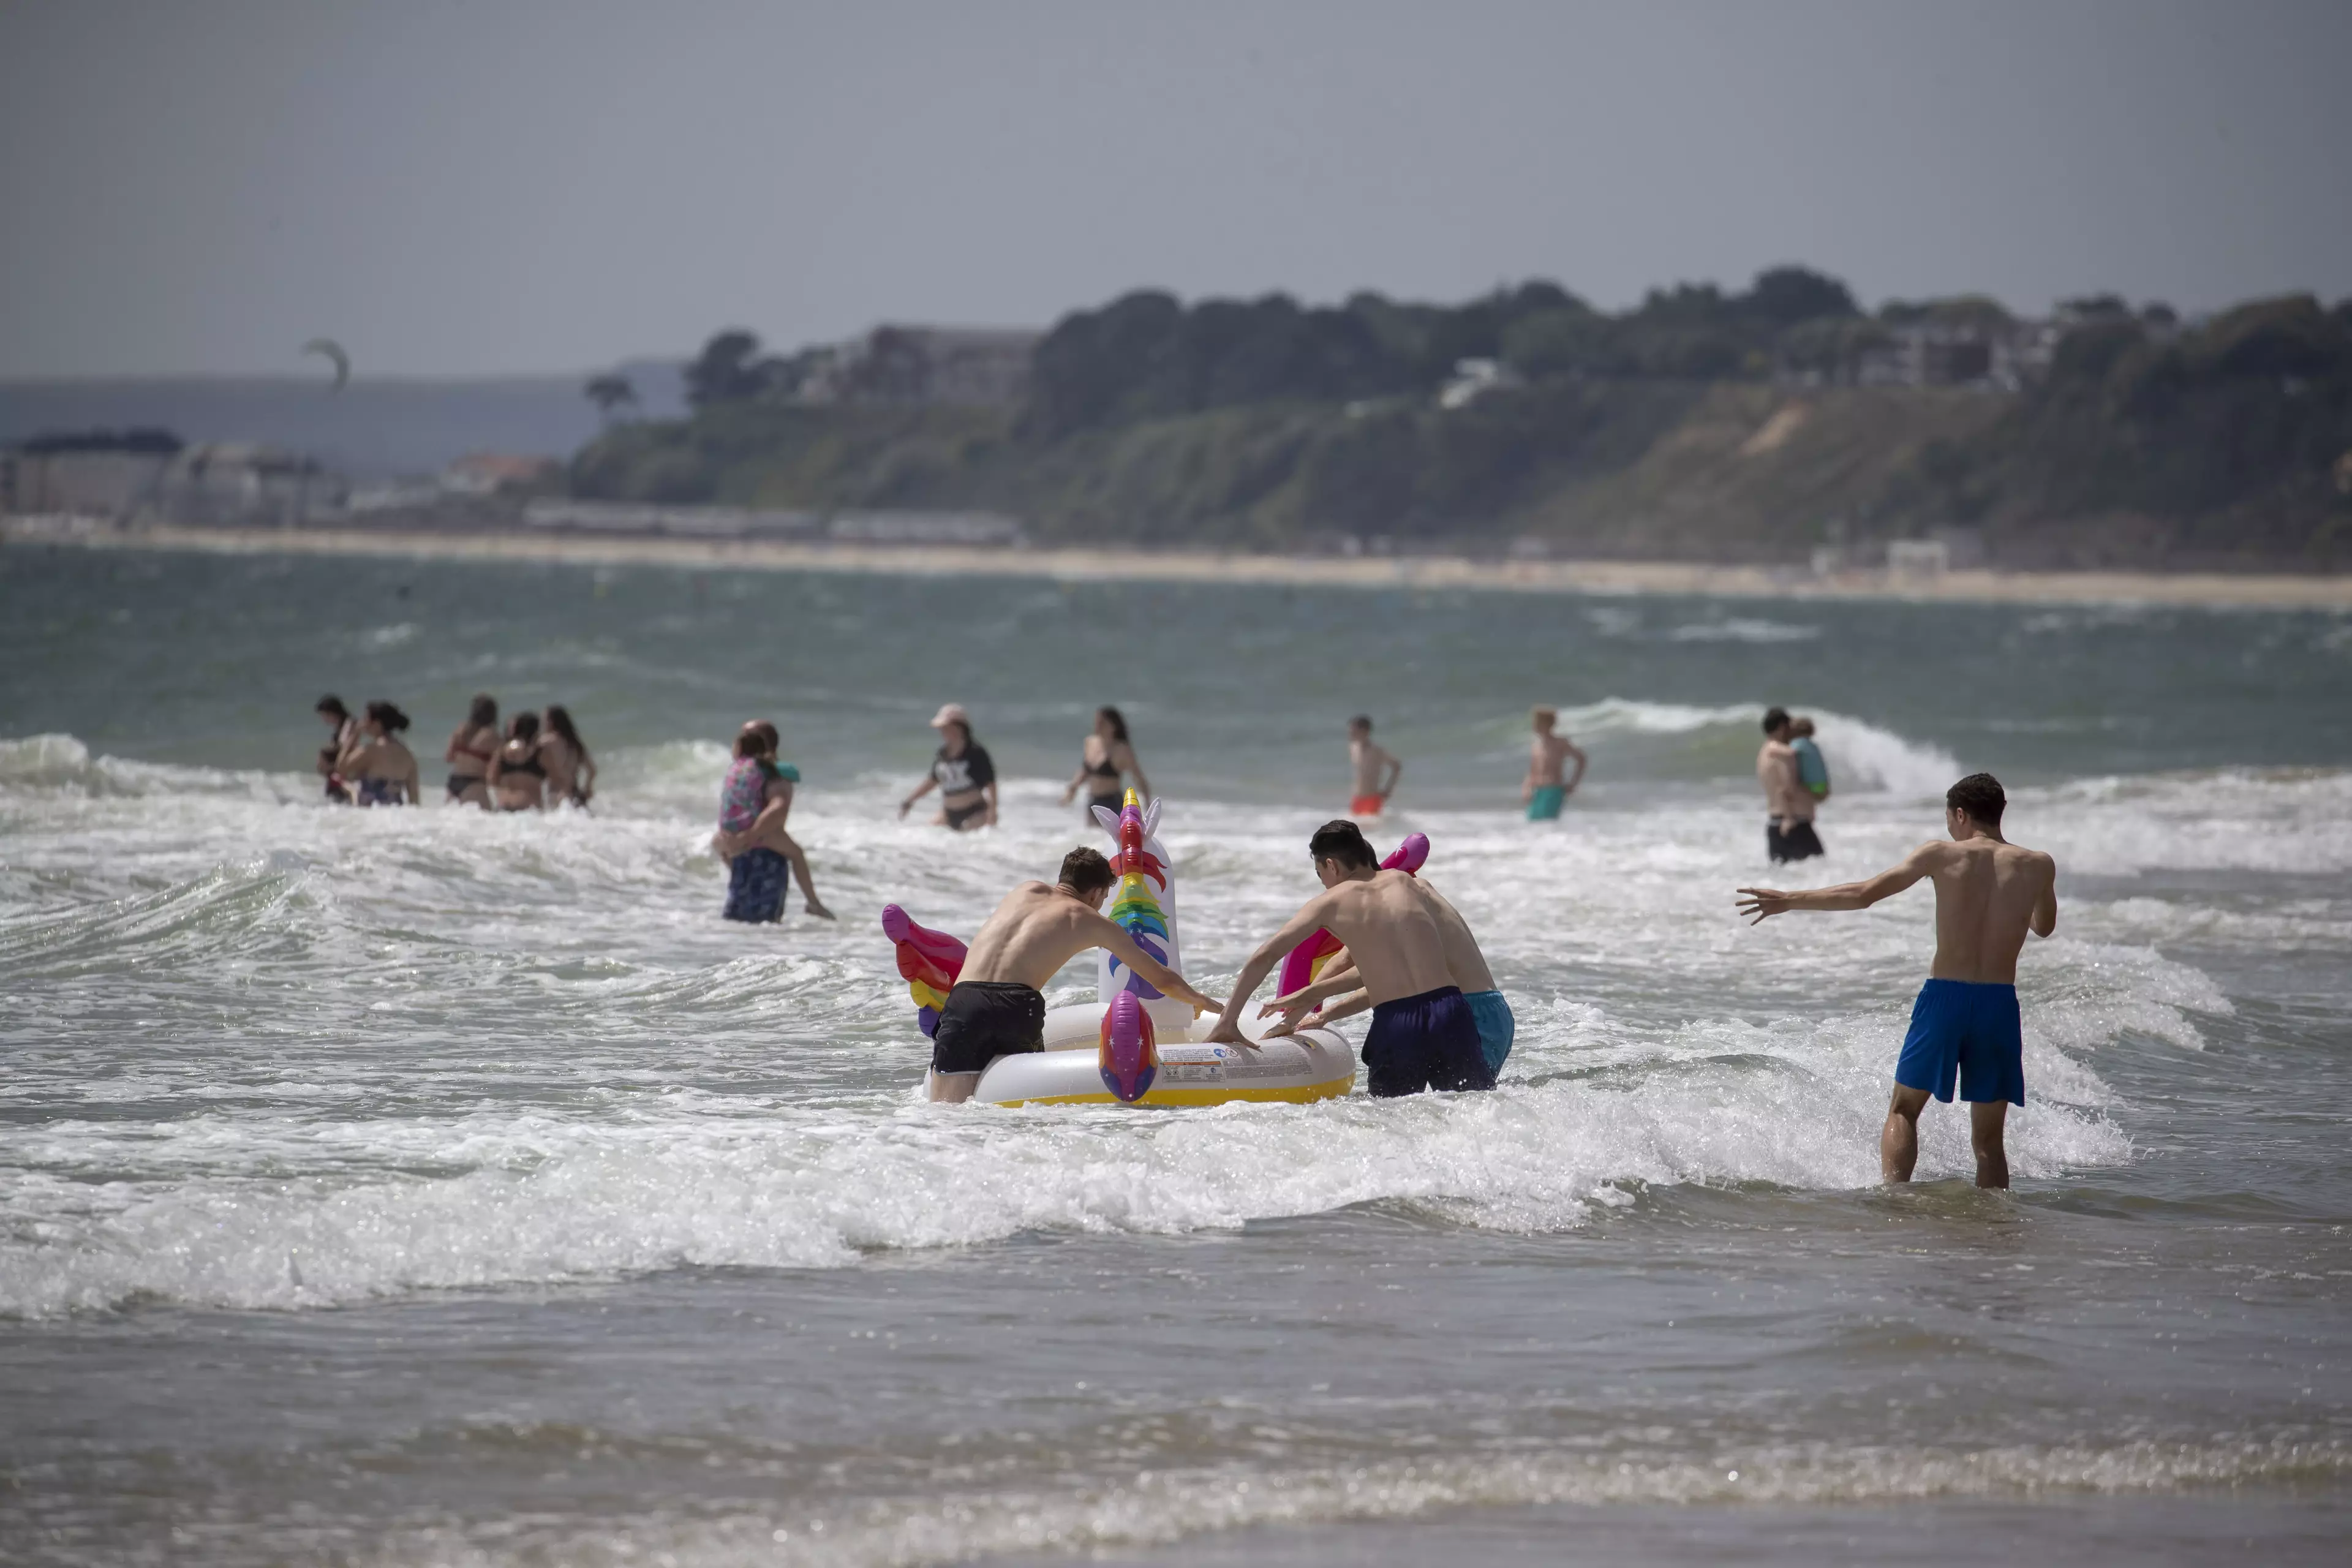 It's going to be hotter than Hawaii this weekend... but the beaches will probably be rammed.